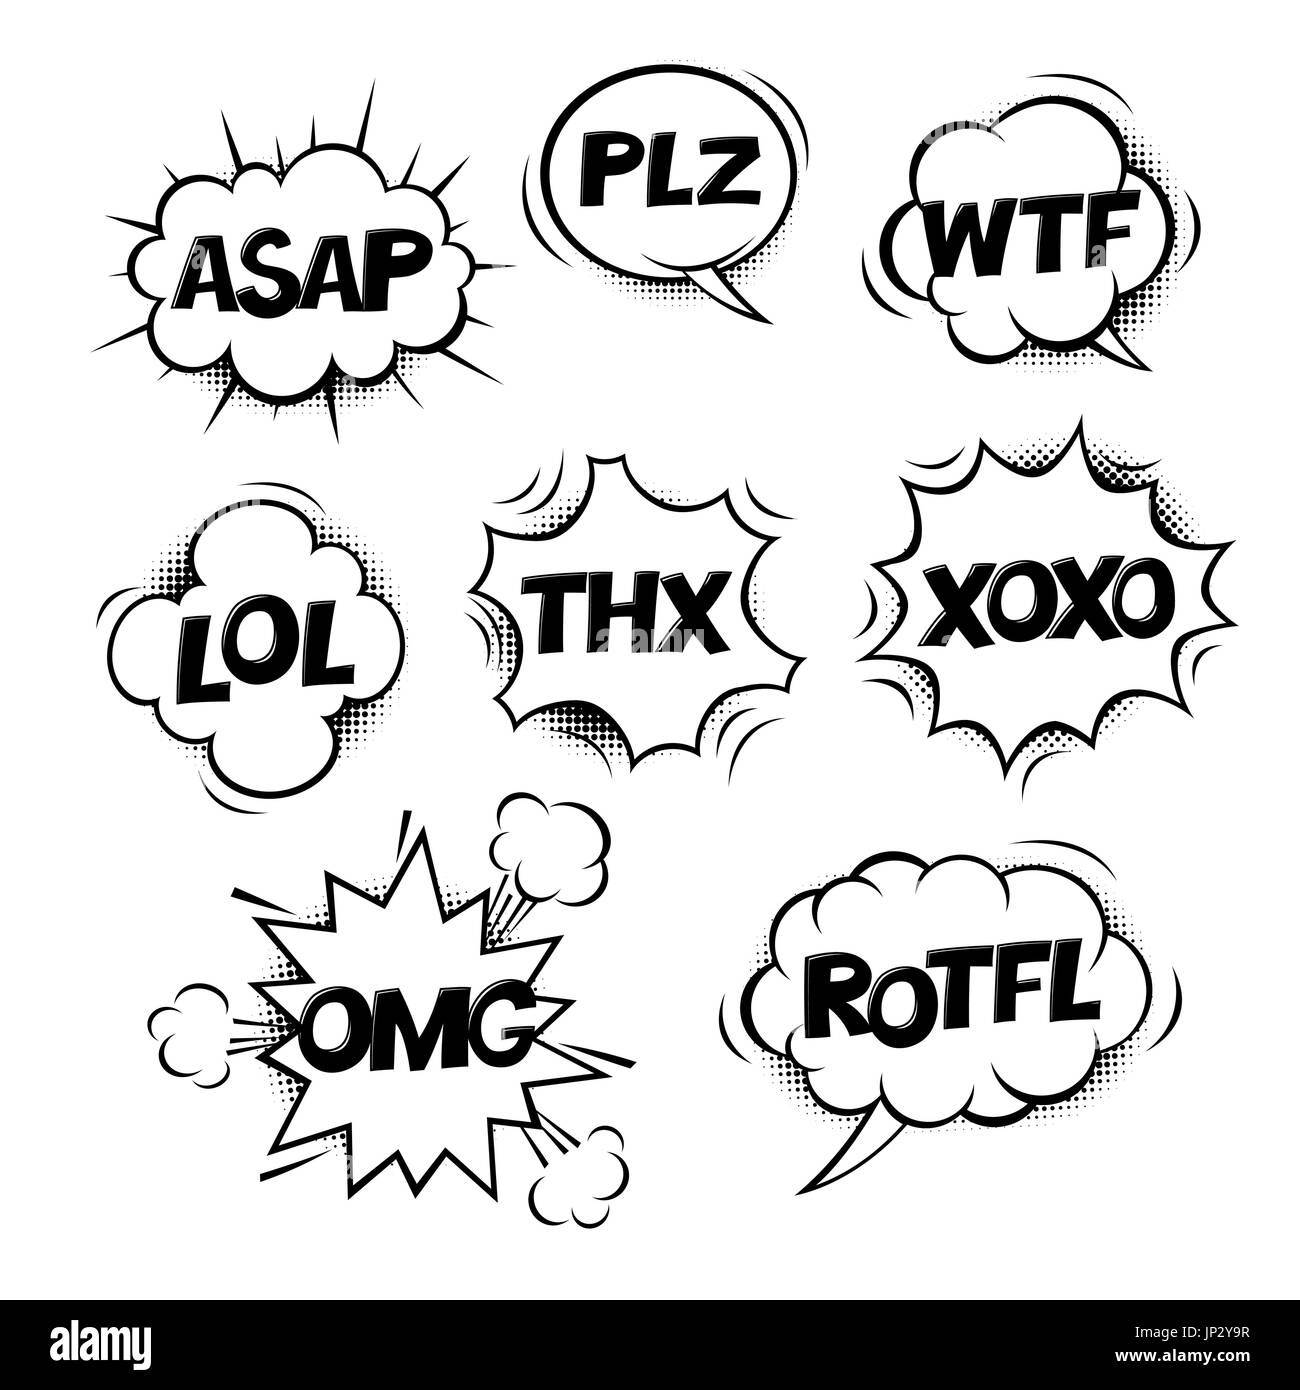 Most common used internet acronyms on comics style monochrome (black & white) speech bubbles. Stock Vector